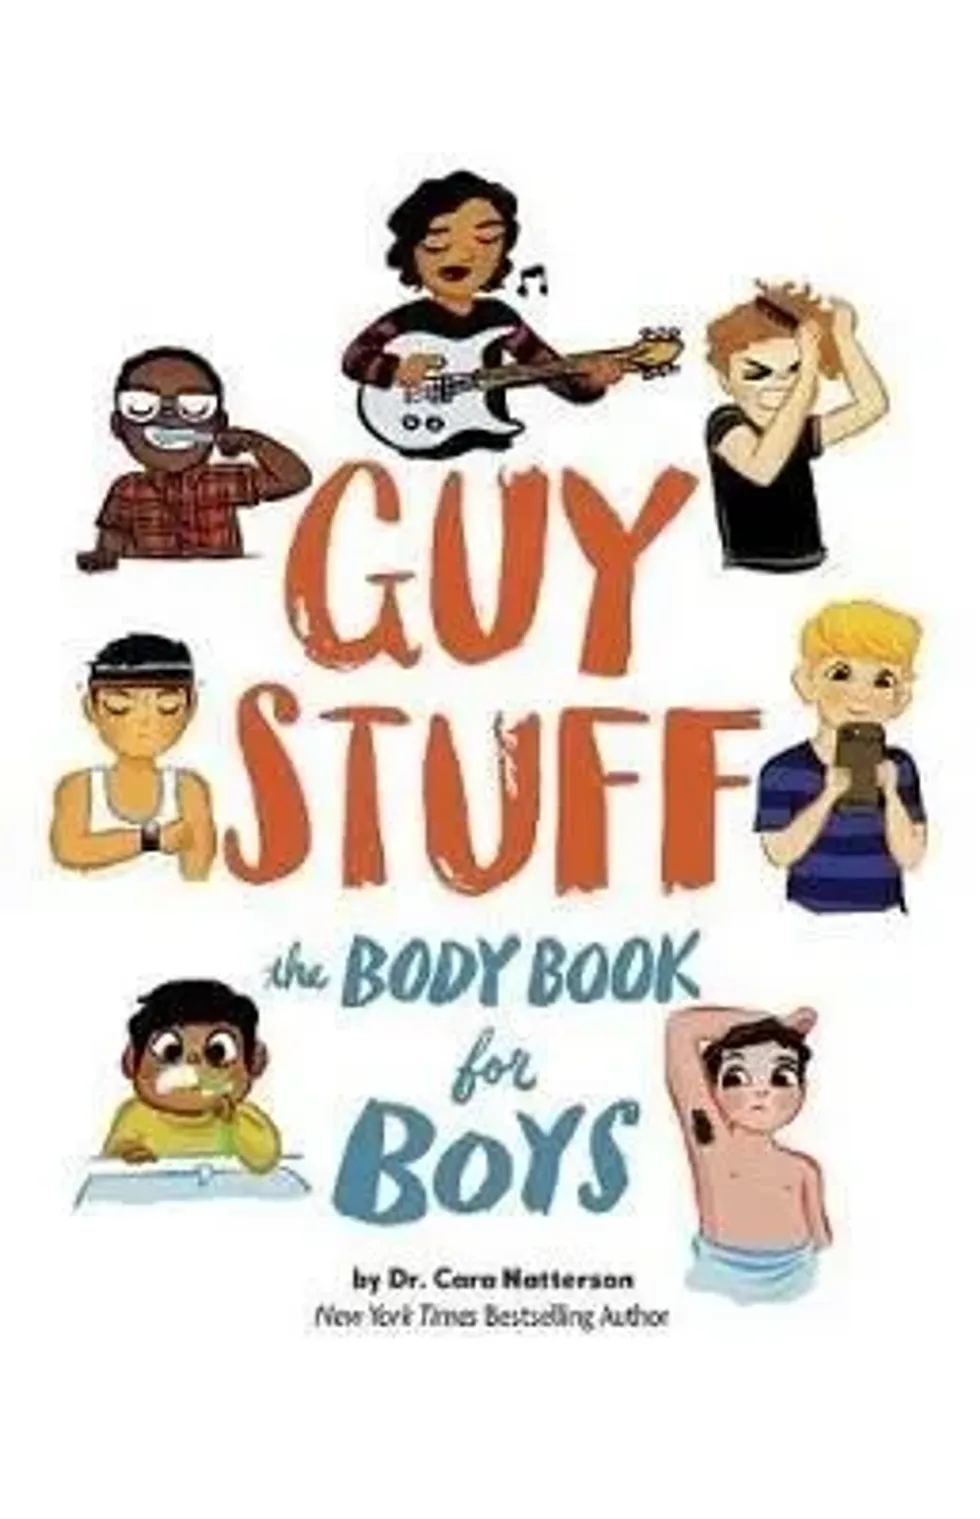 Guy Stuff: The Body Book for Boys.